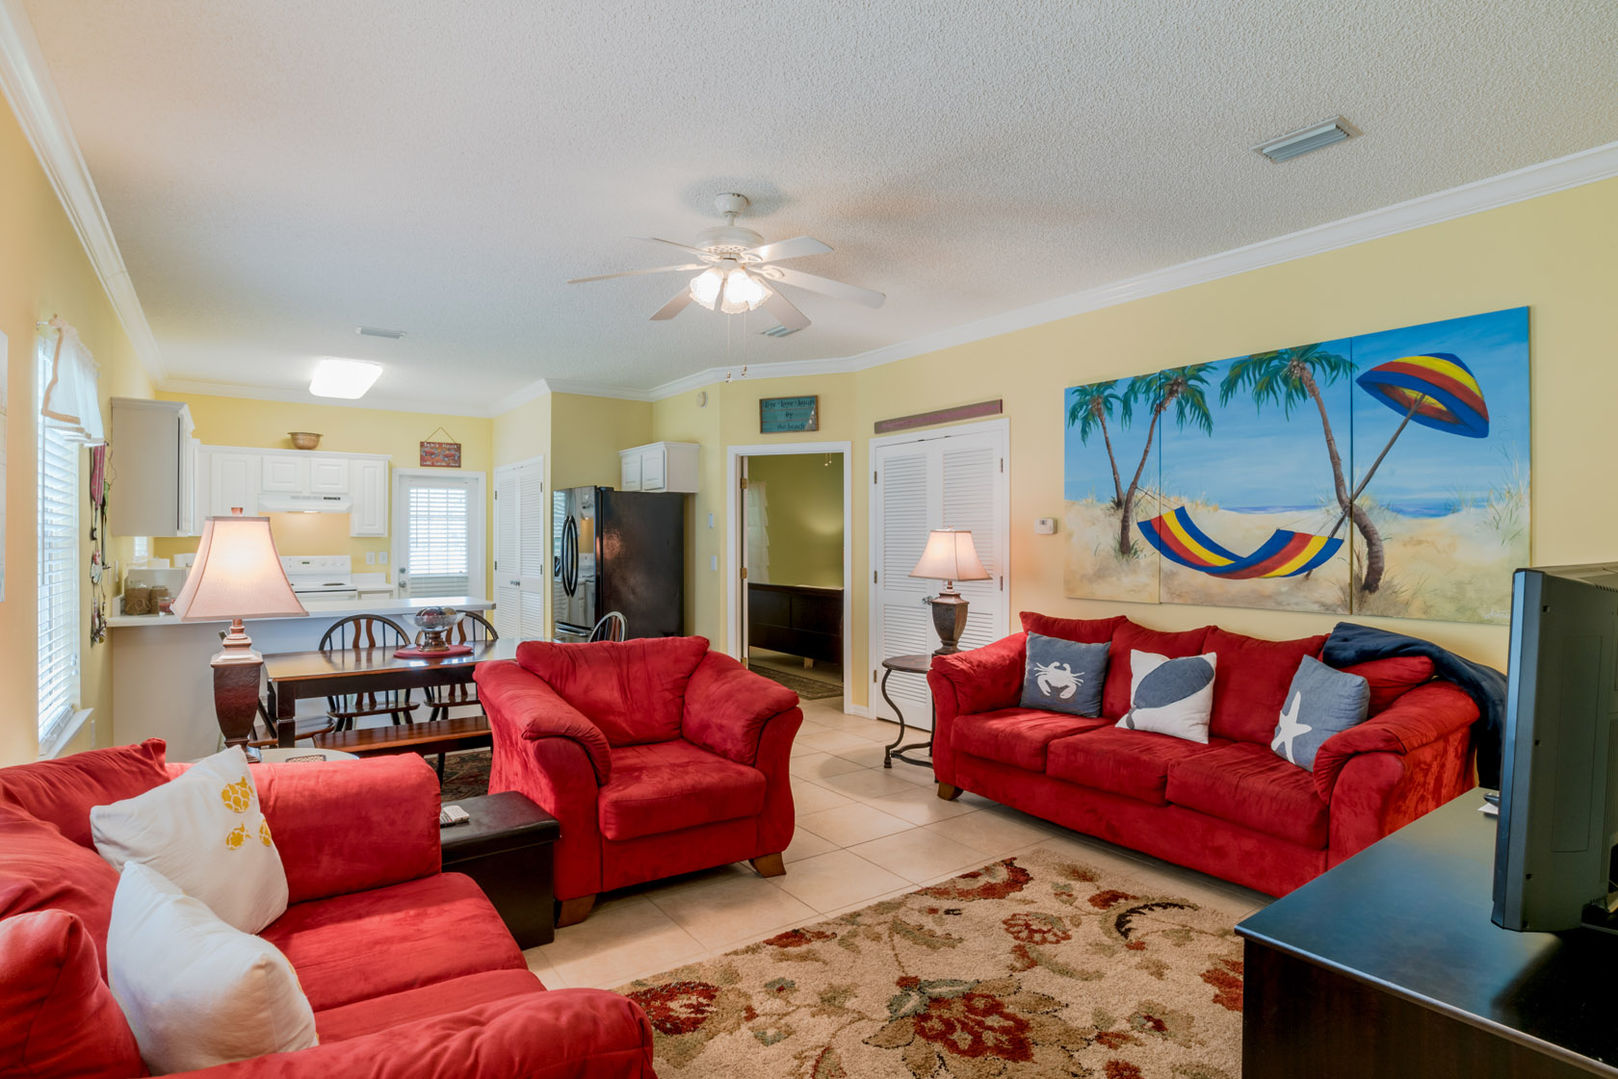 spacious living room in our vacation rentals in Ft Morgan Alabama with red couch and armchair